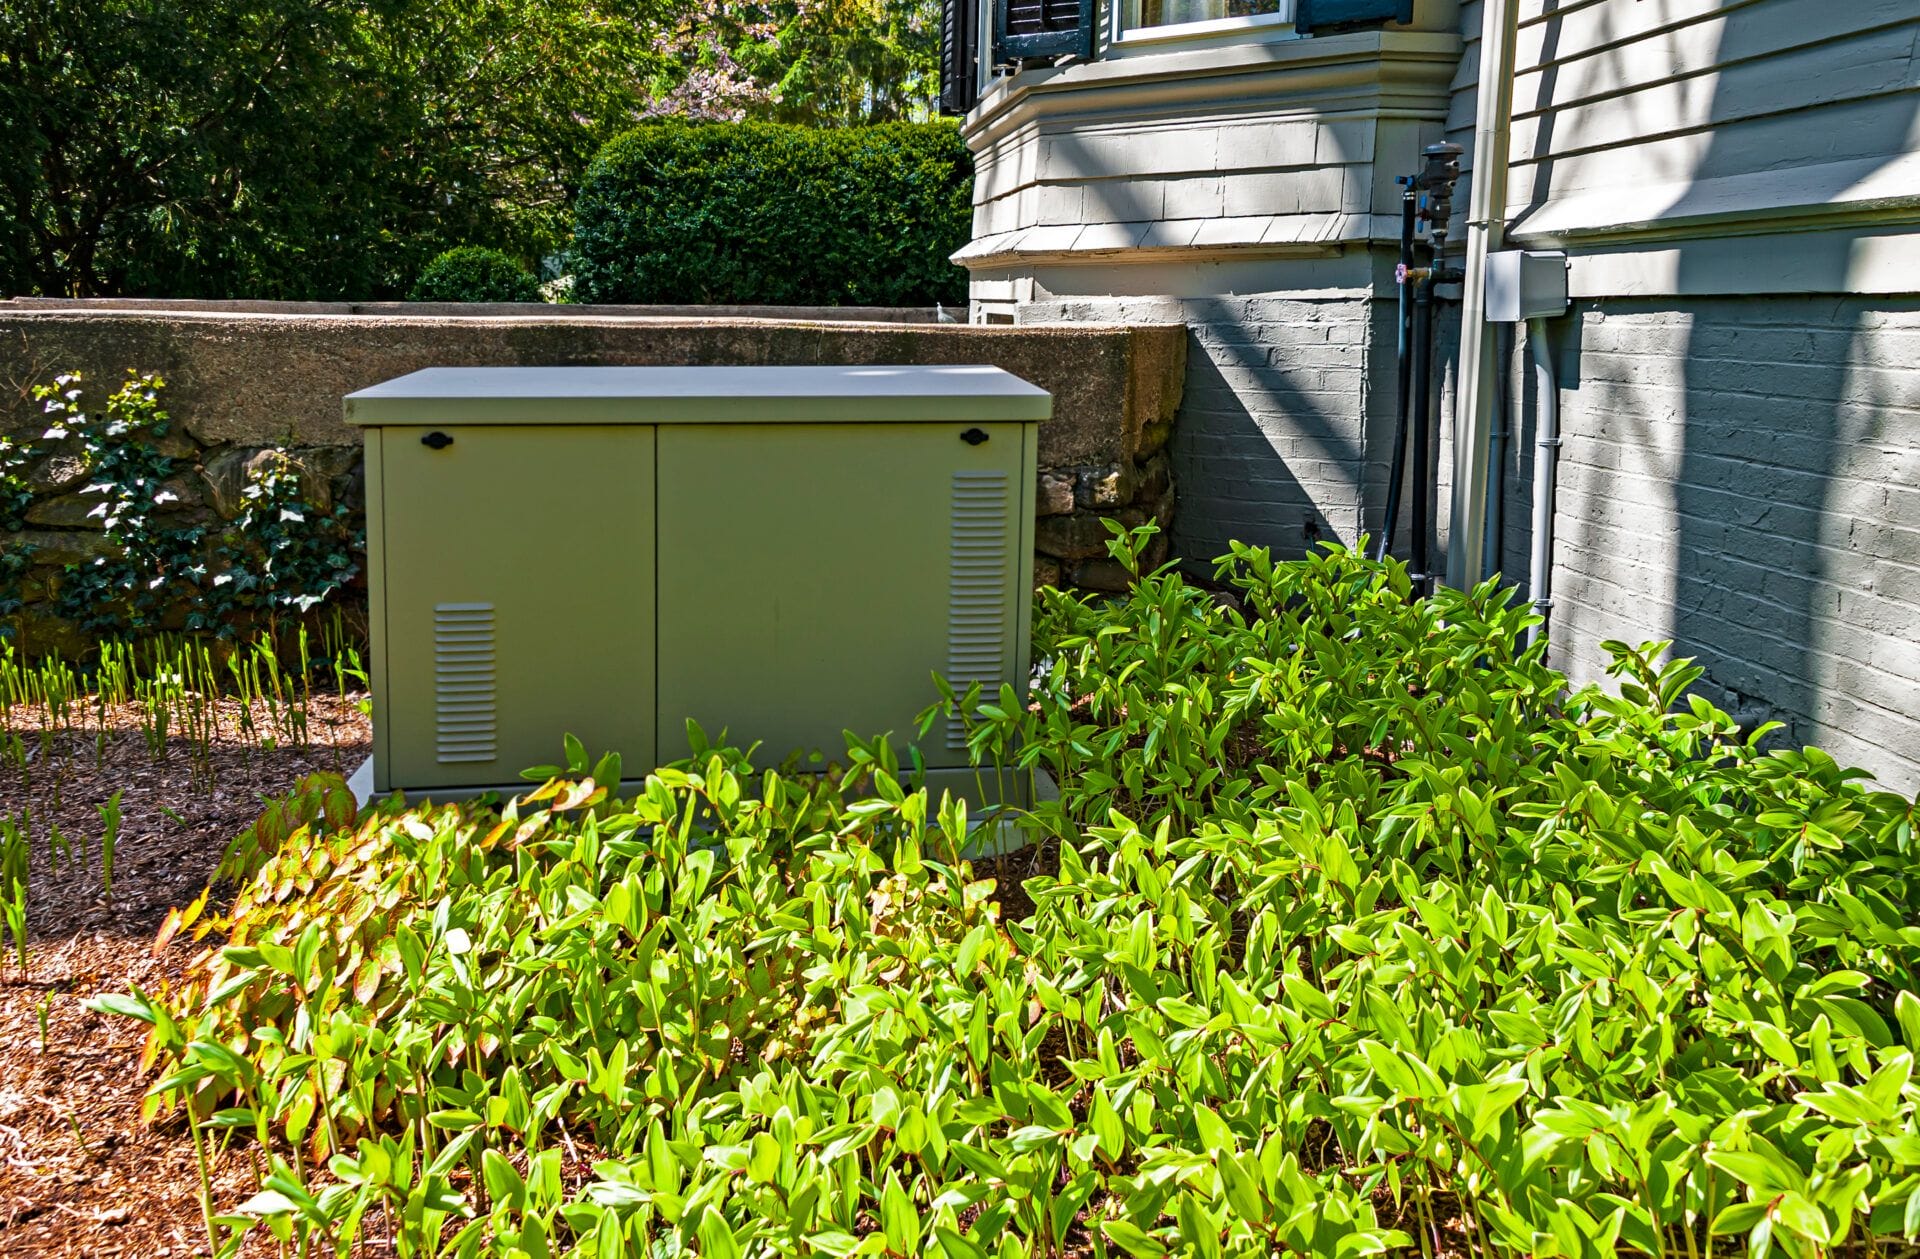 Is a Whole Home Generator the Right Choice?